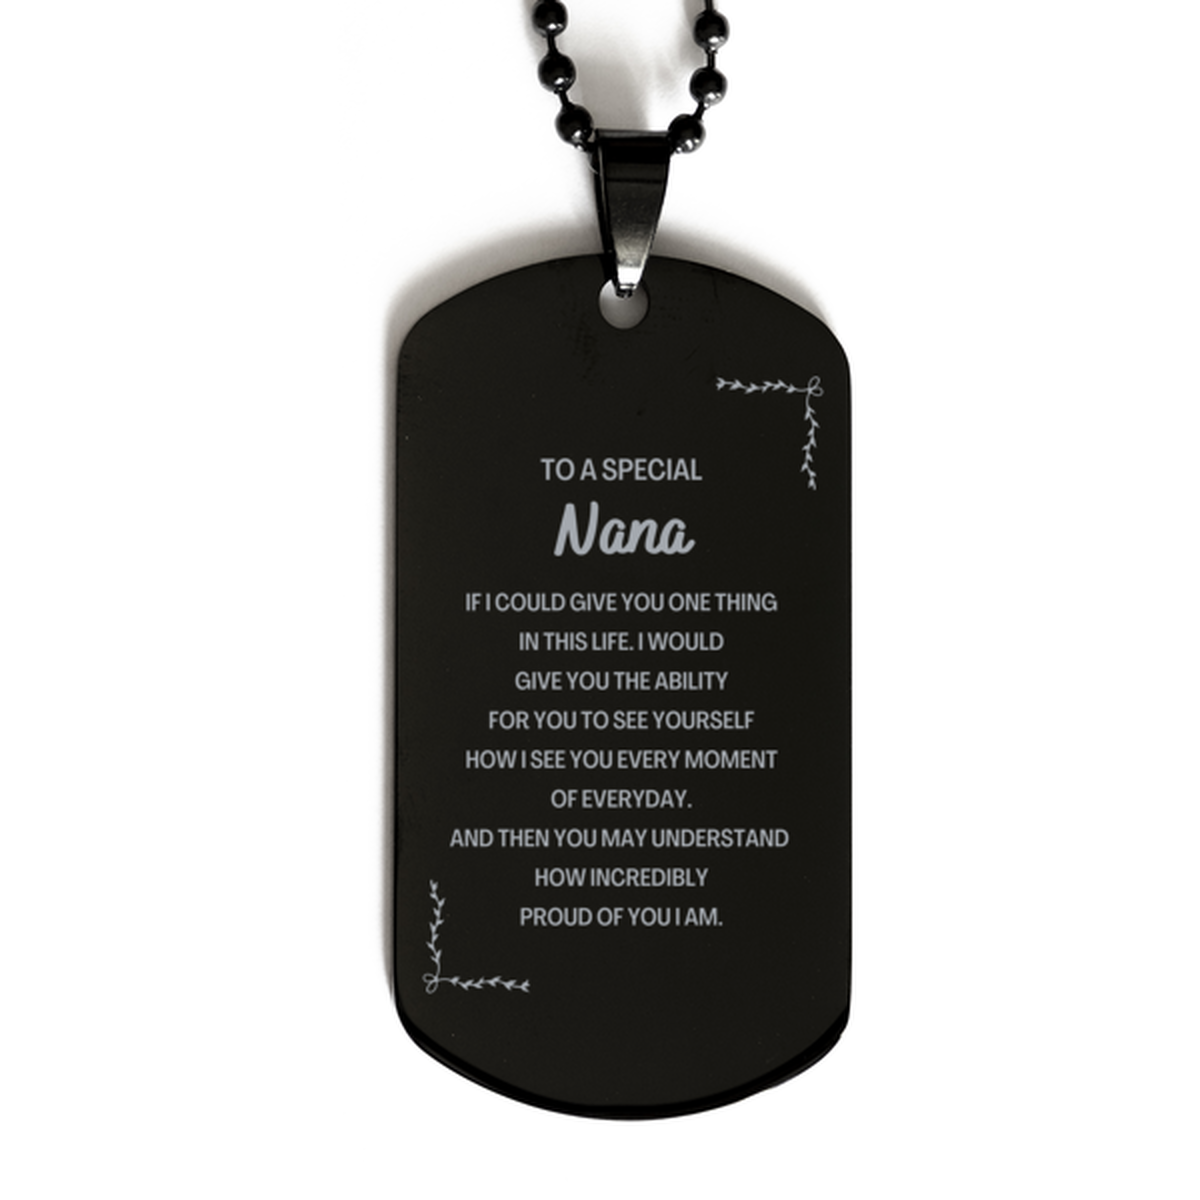 To My Nana Black Dog Tag, Gifts For Nana Engraved, Inspirational Gifts for Christmas Birthday, Epic Gifts for Nana To A Special Nana how incredibly proud of you I am